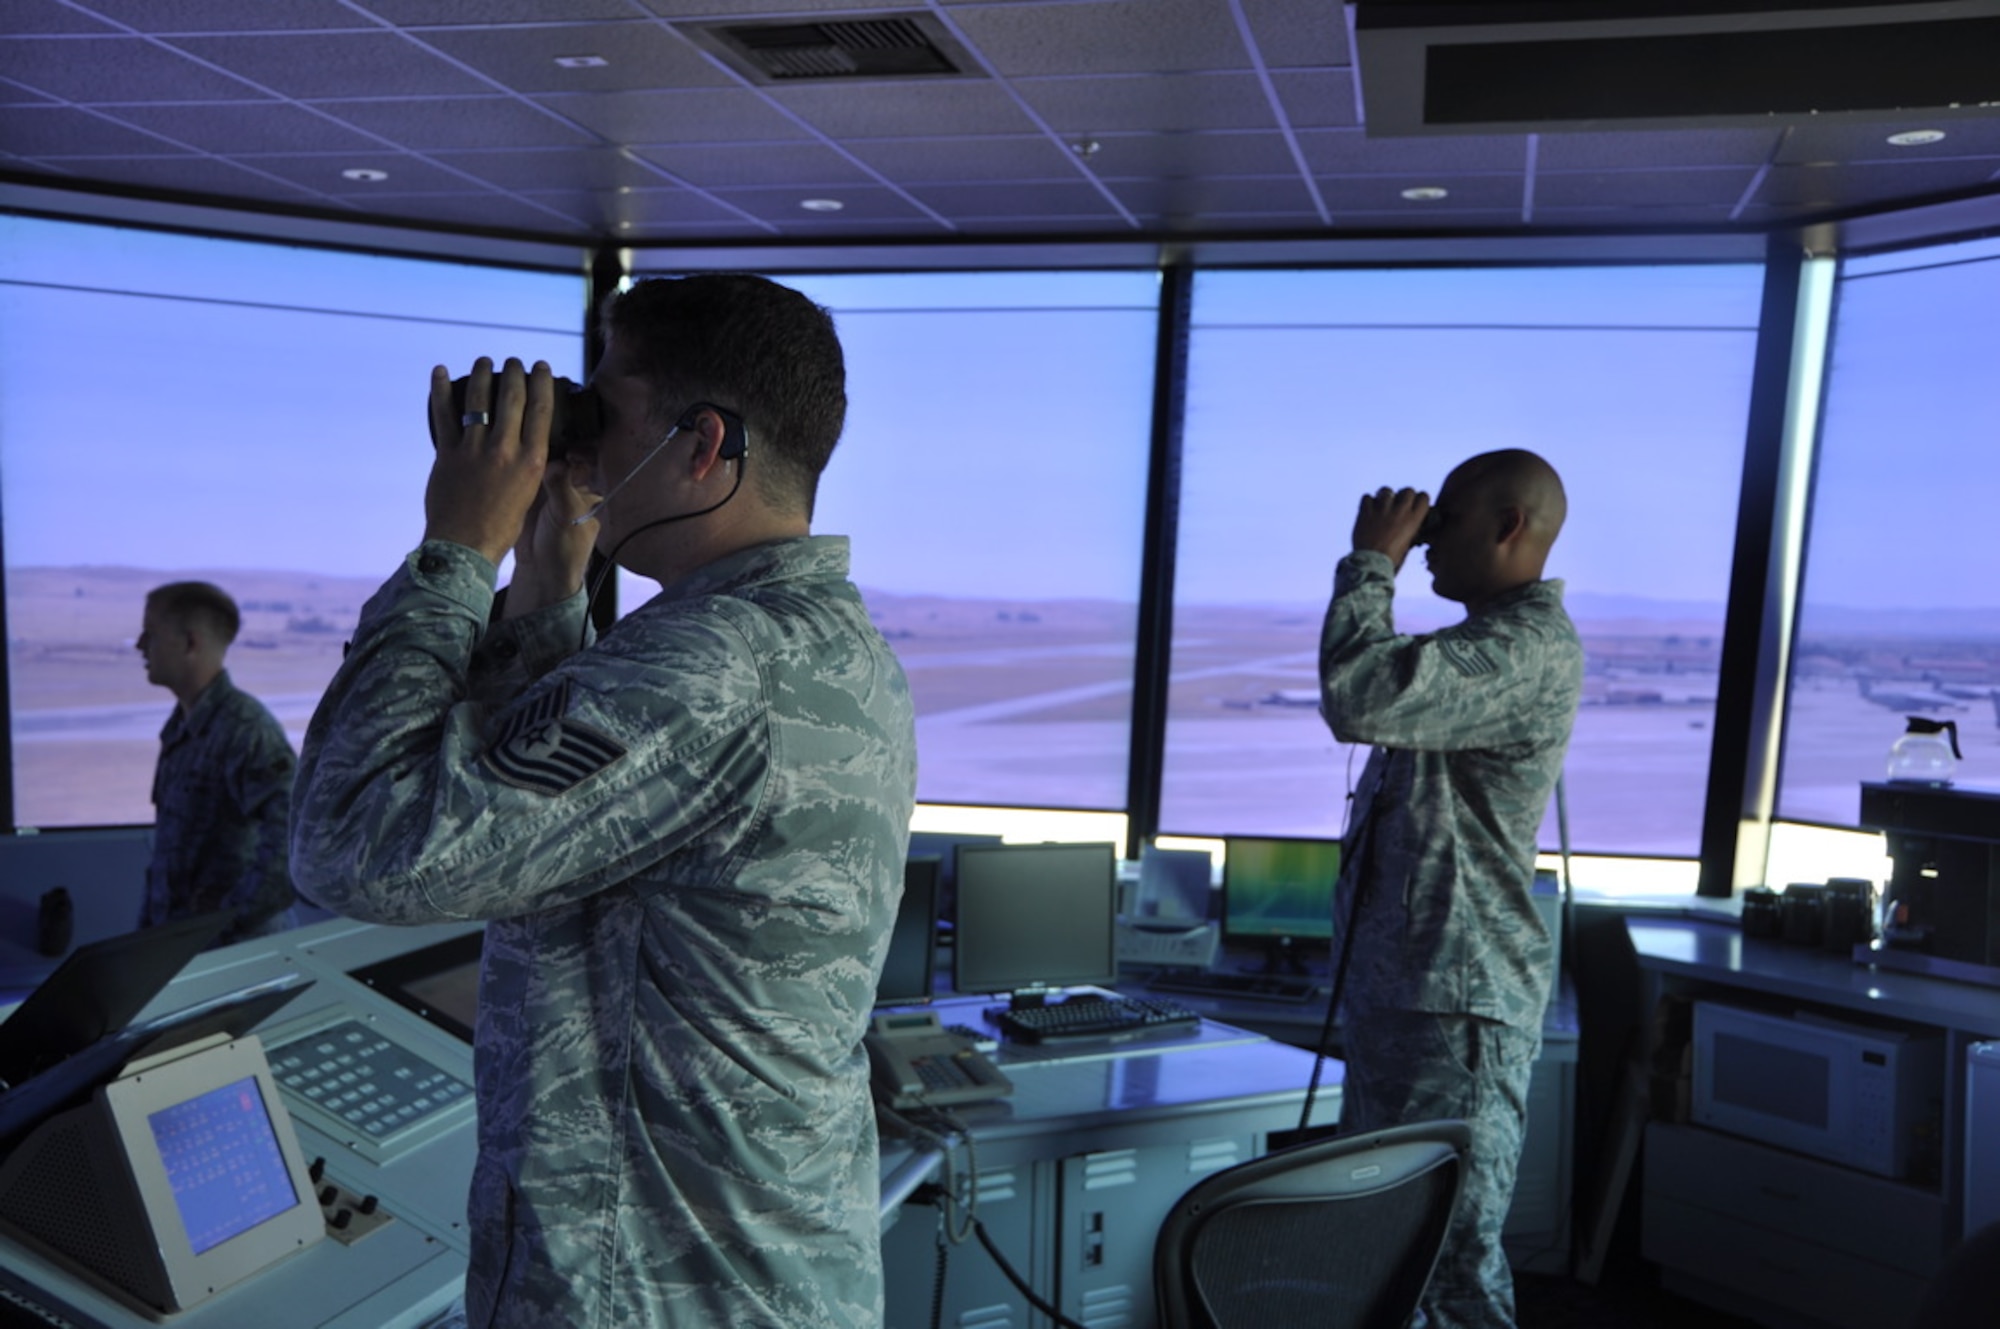 Tech. Sgt. Gerals Russell, 570th Global Mobility Readiness Squadron air traffic controller and Tech, Sgt. GreyLynn Carr, 570th GMRS air traffic controller, use binoculars July 27 to look at aircraft on the taxiway from the Air Traffic Control Tower. (U.S. Air Force photo/ Staff. Sgt. Patrick Harrower)